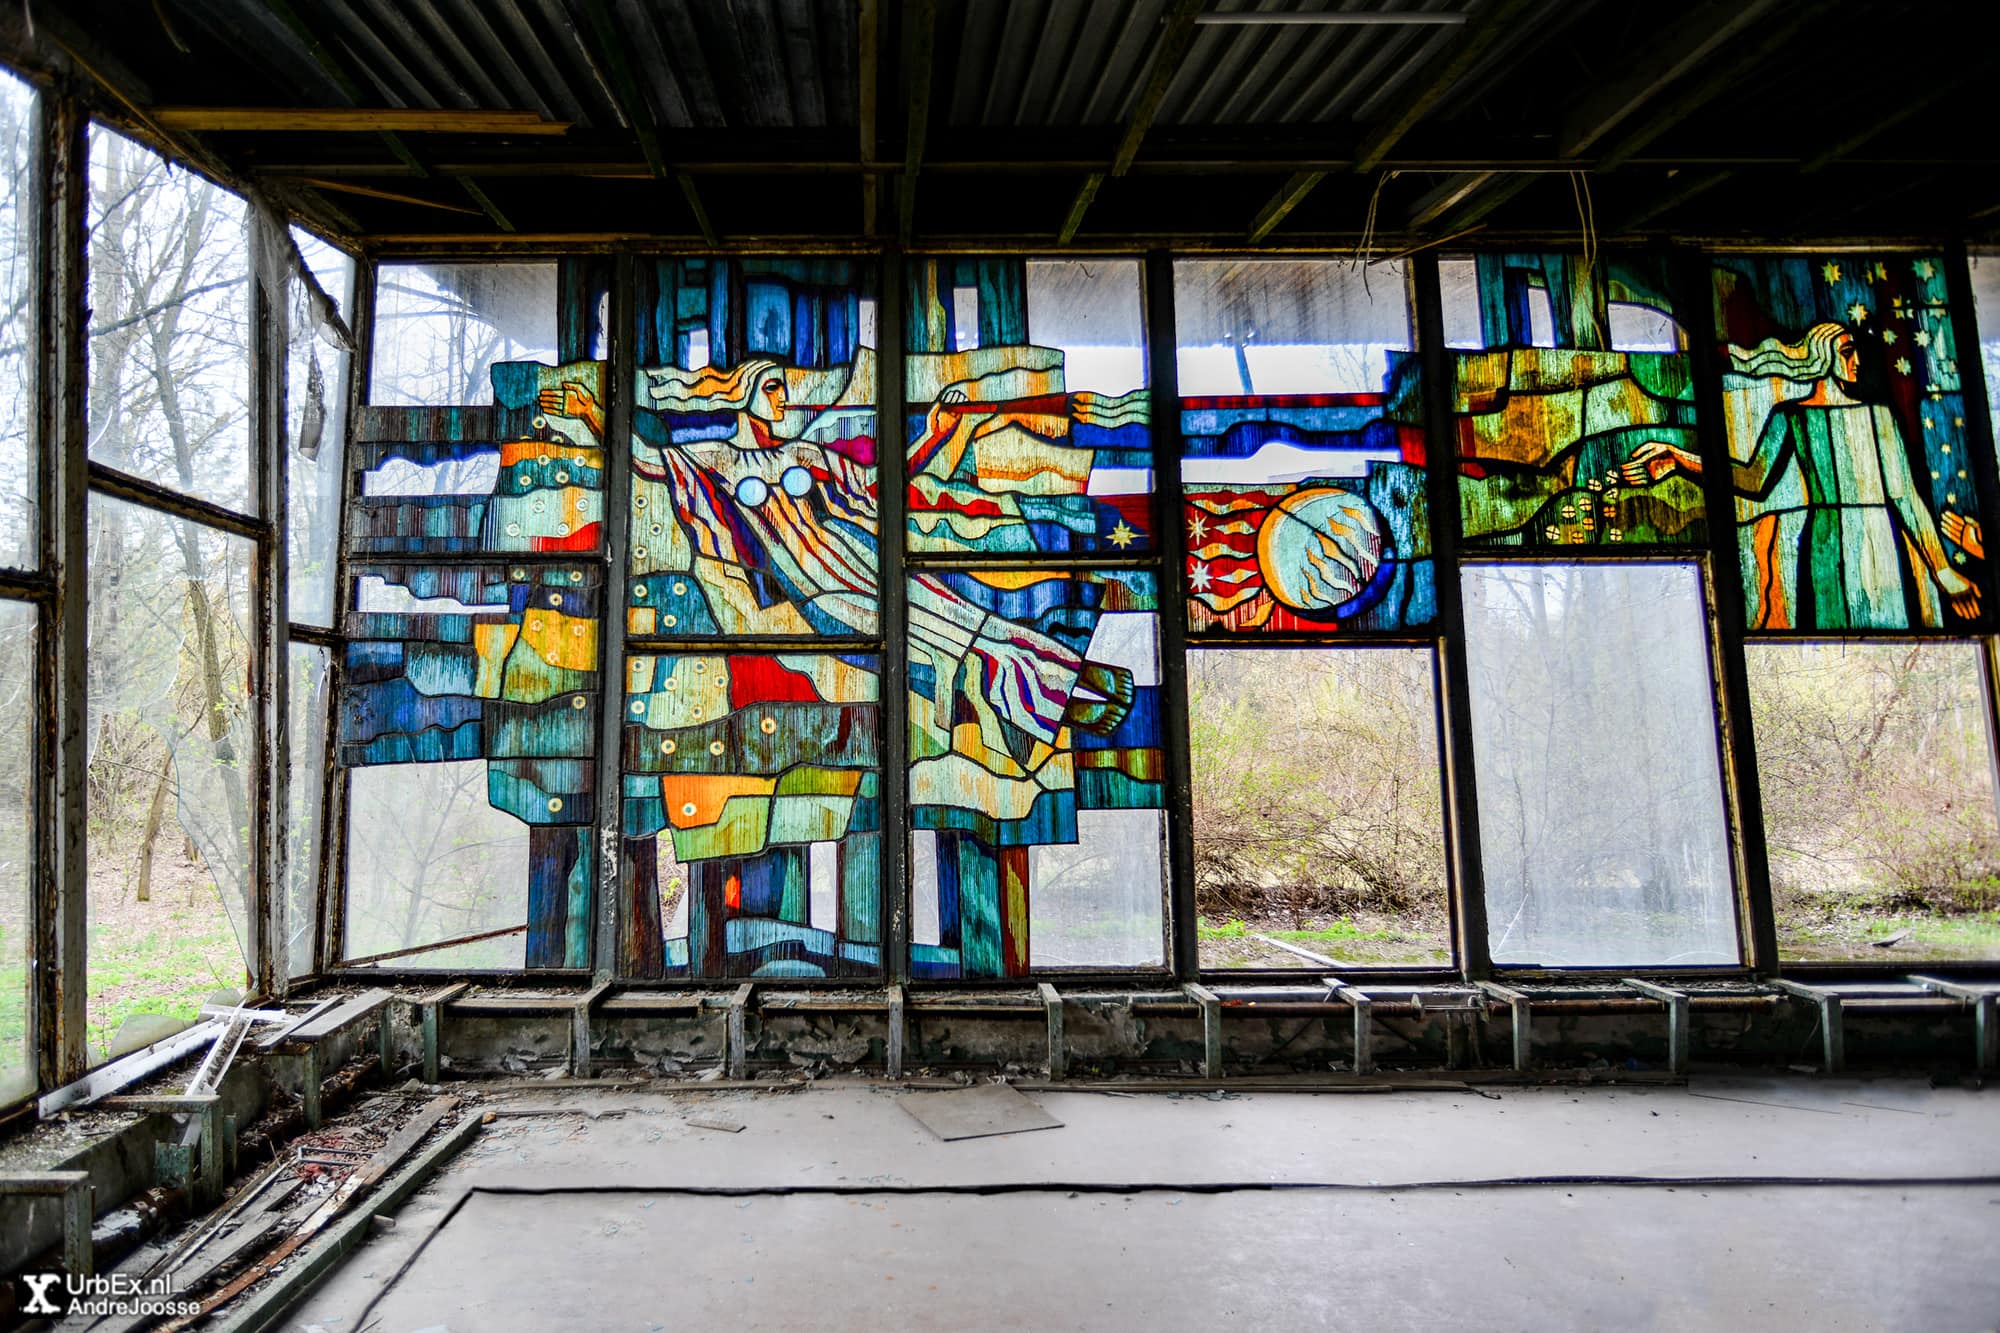 Cafe Pripyat, also called ‘The Dish’